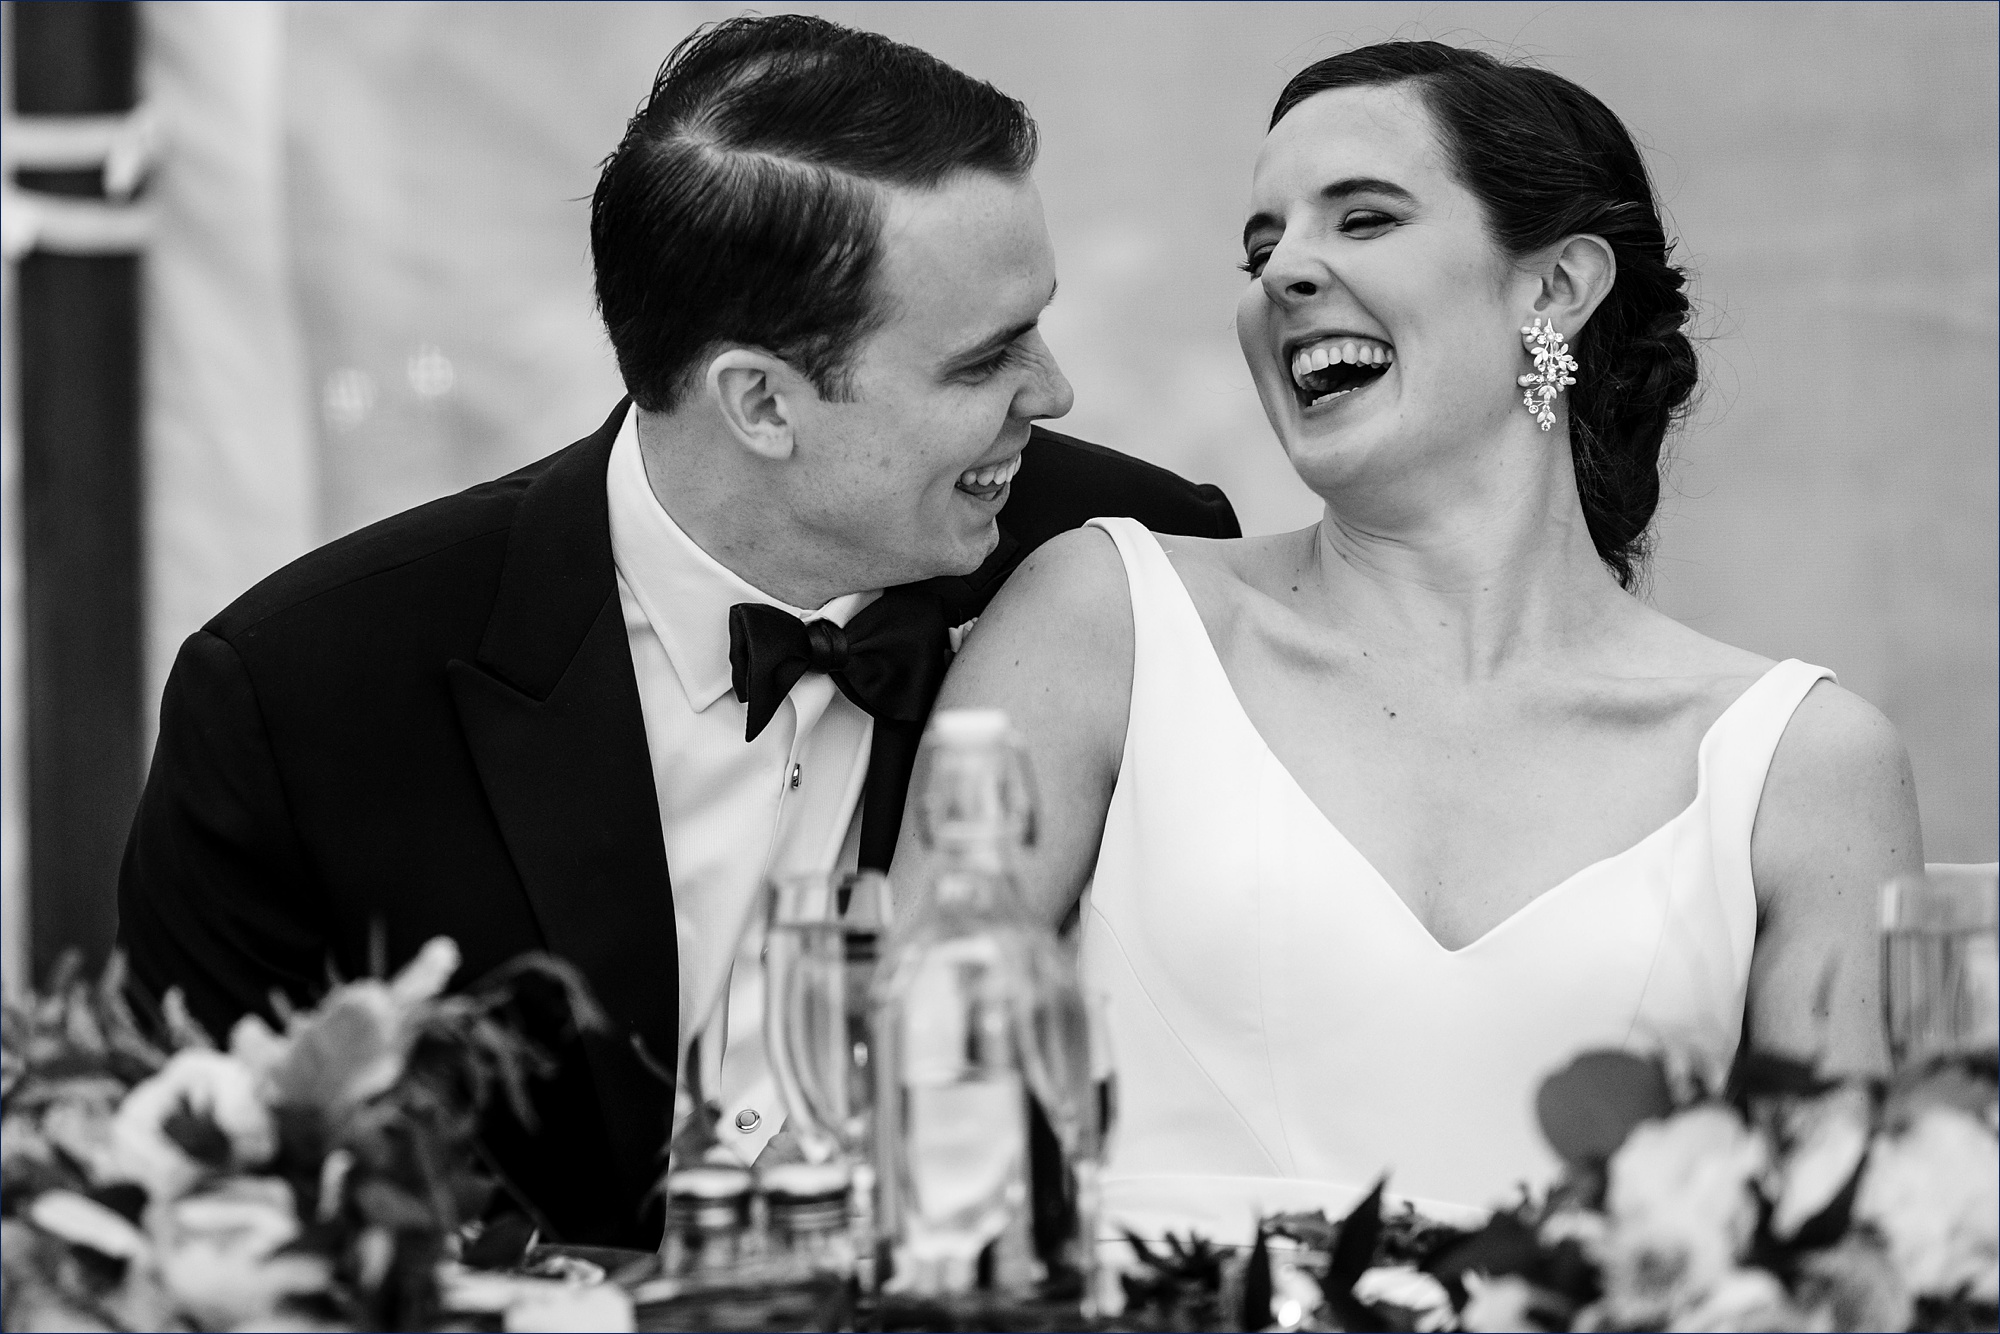 The bride and groom laugh during the toasts at their Maine wedding reception